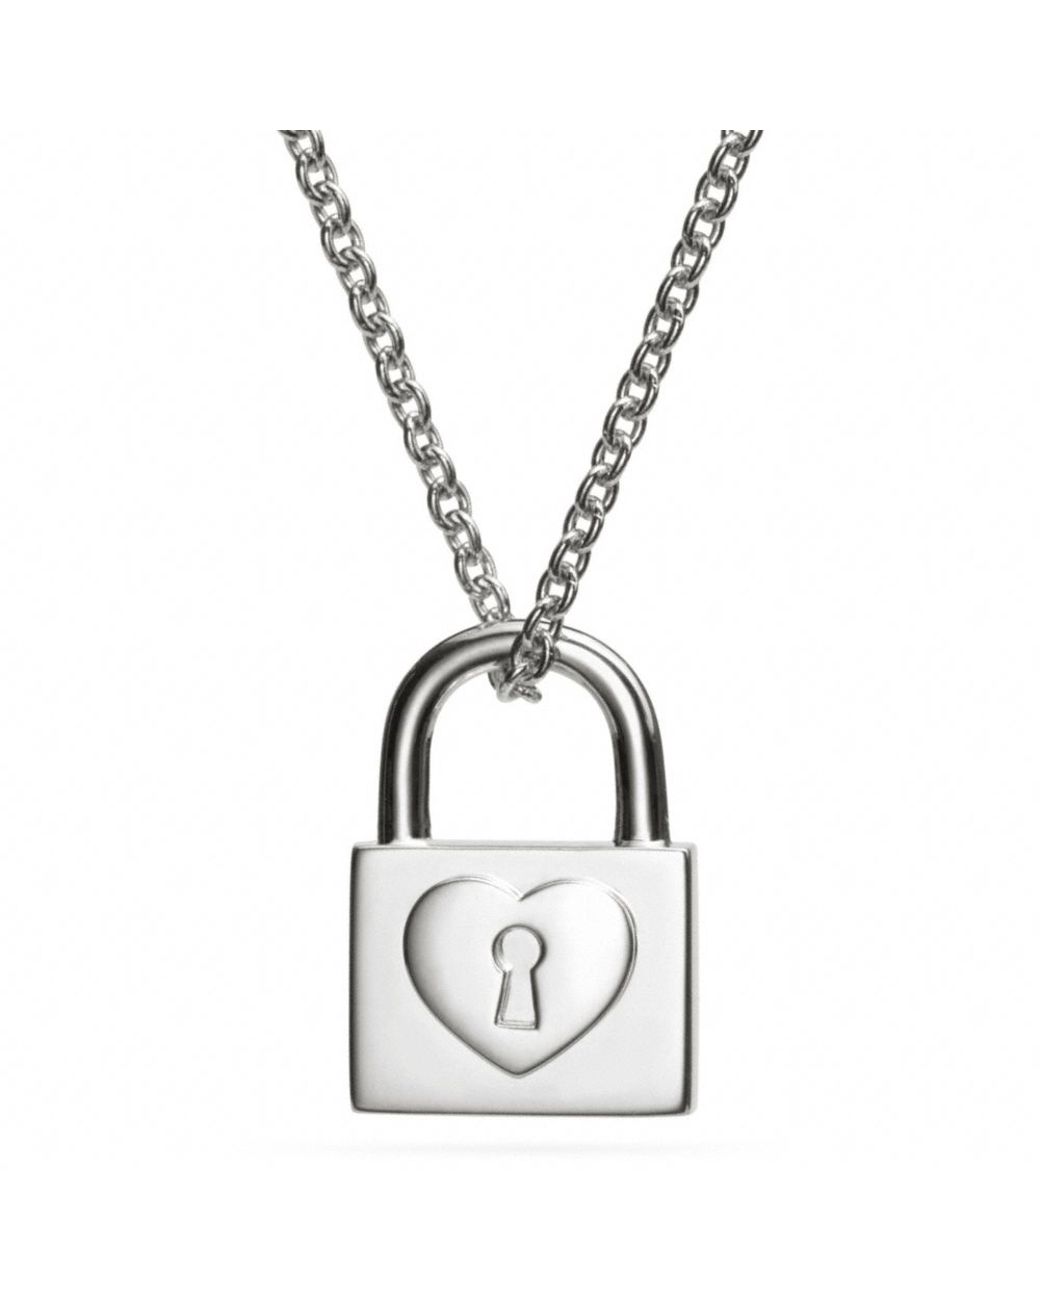 COACH®: Quilted Padlock Key Pendant Necklace